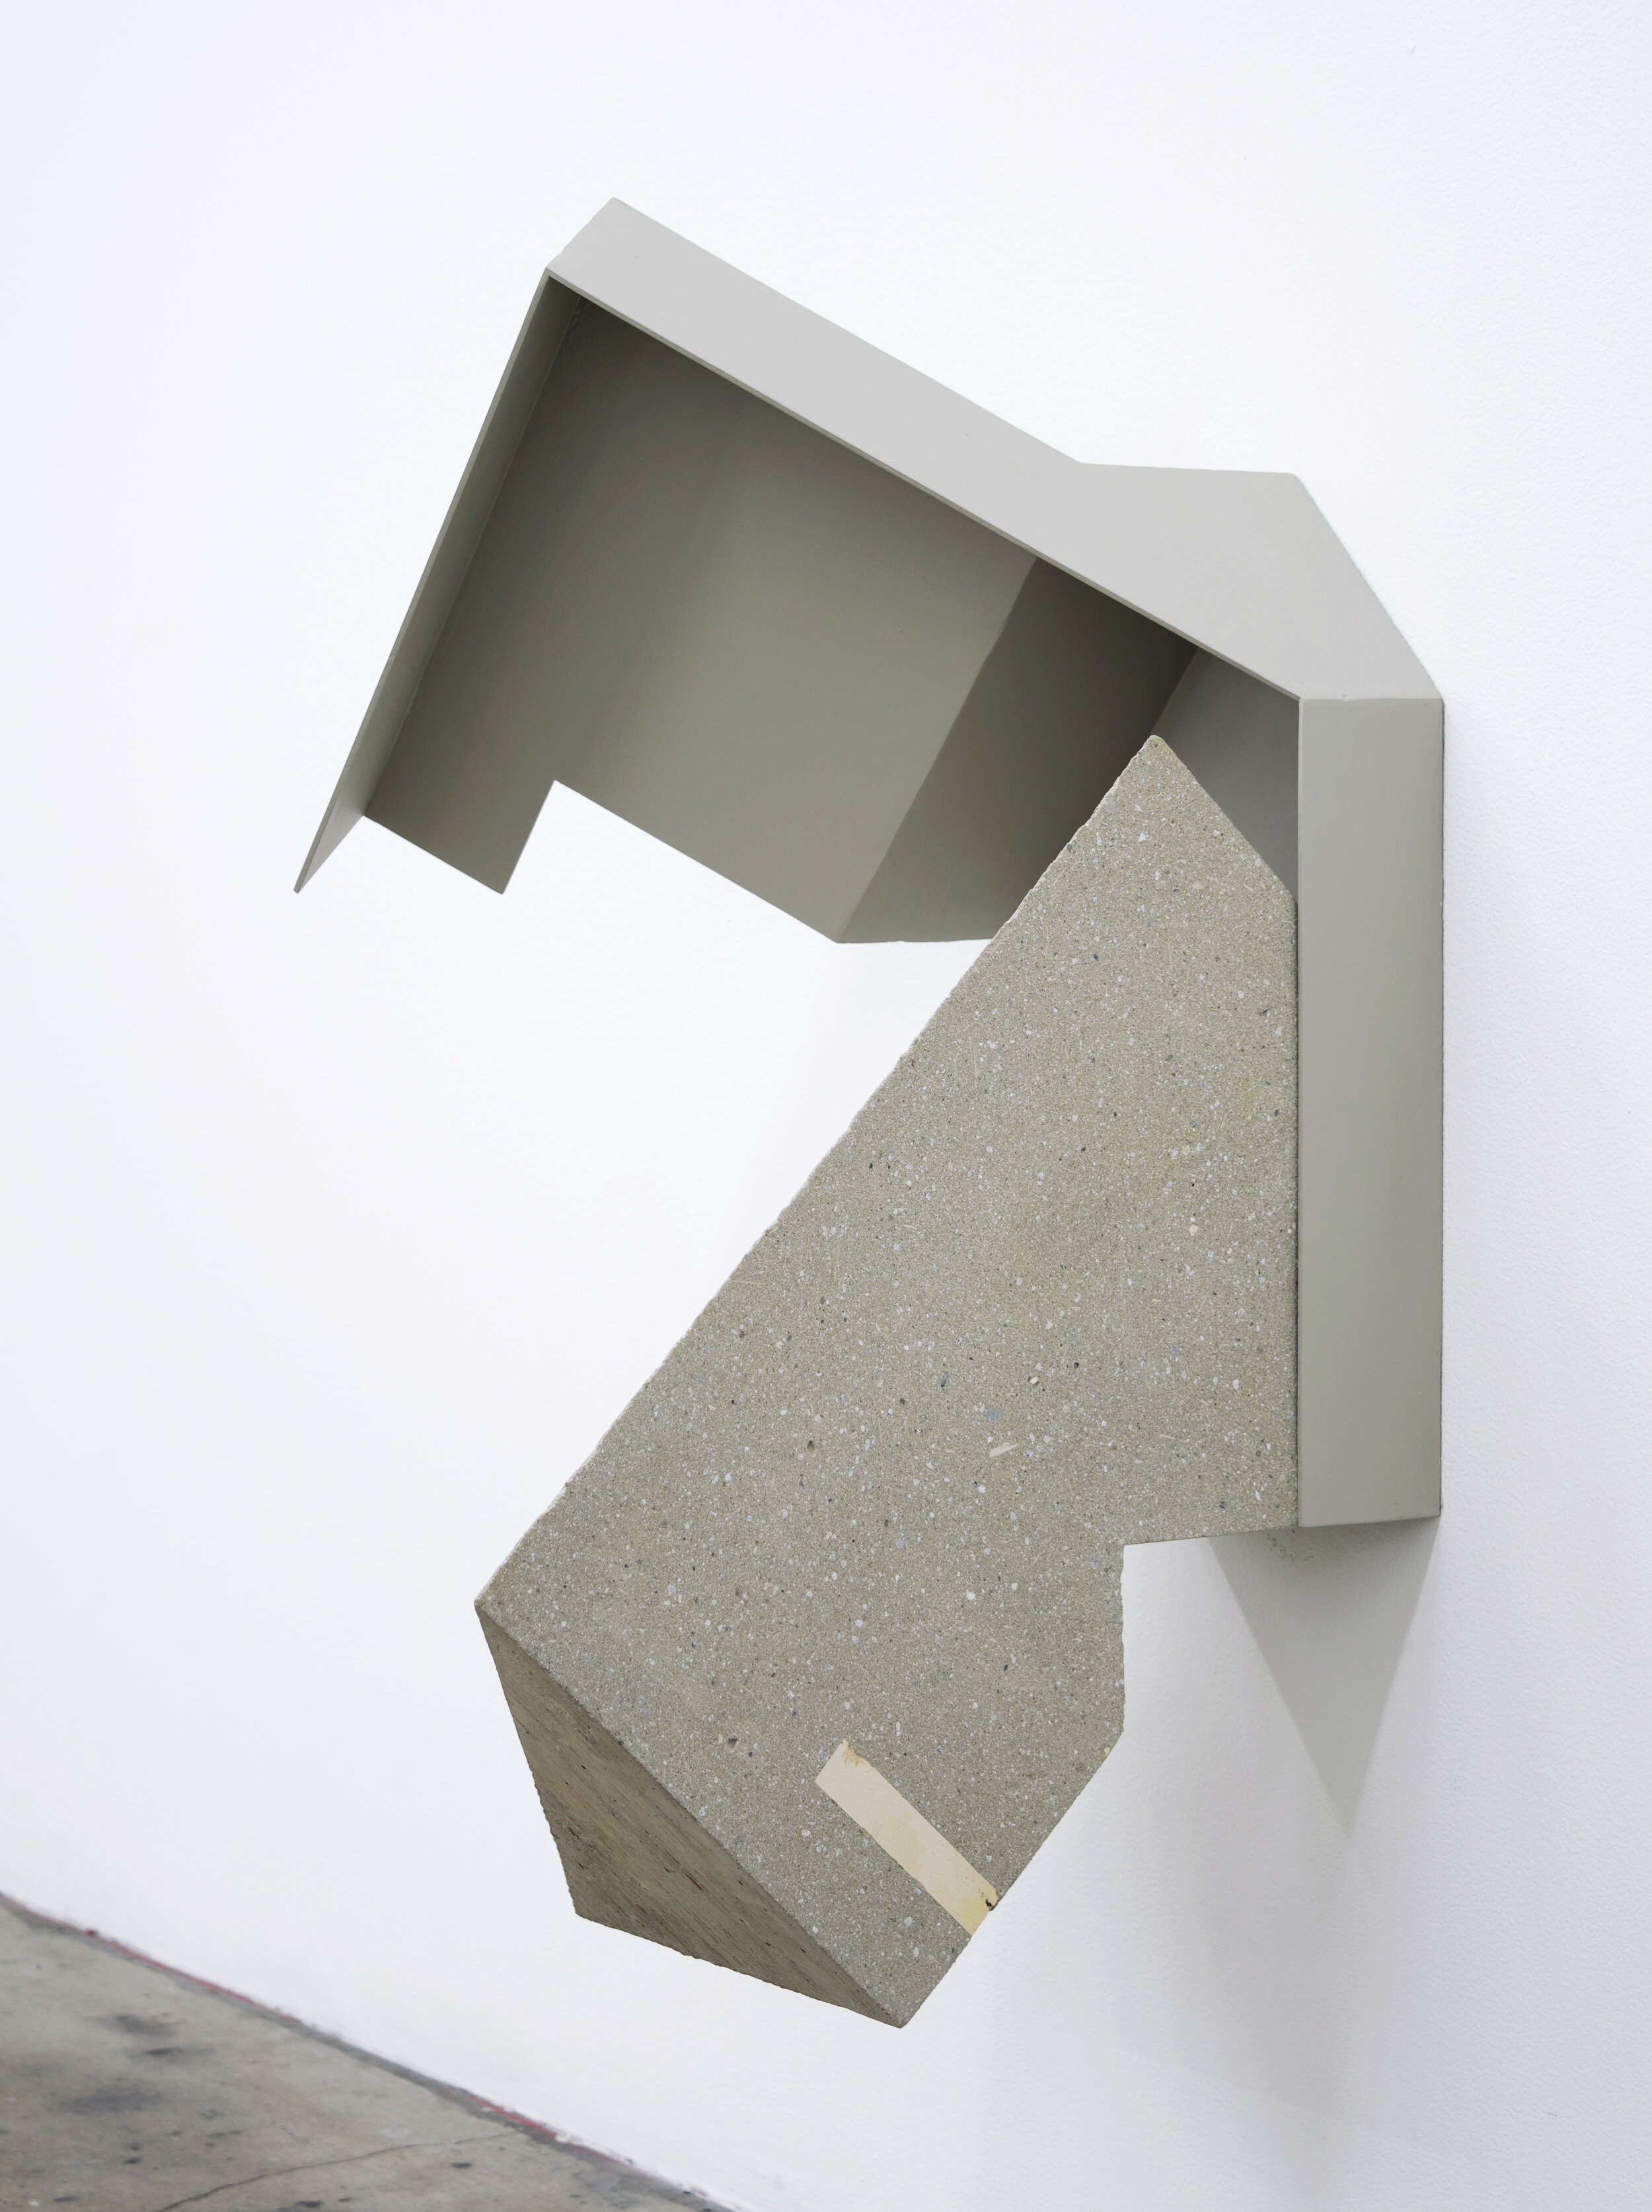   Cliopale , 2019, fibre-reinforced concrete, ceramic inlay, polystyrene foam, painted steel, stainless steel hardware, 30 x 19 x 18 in 